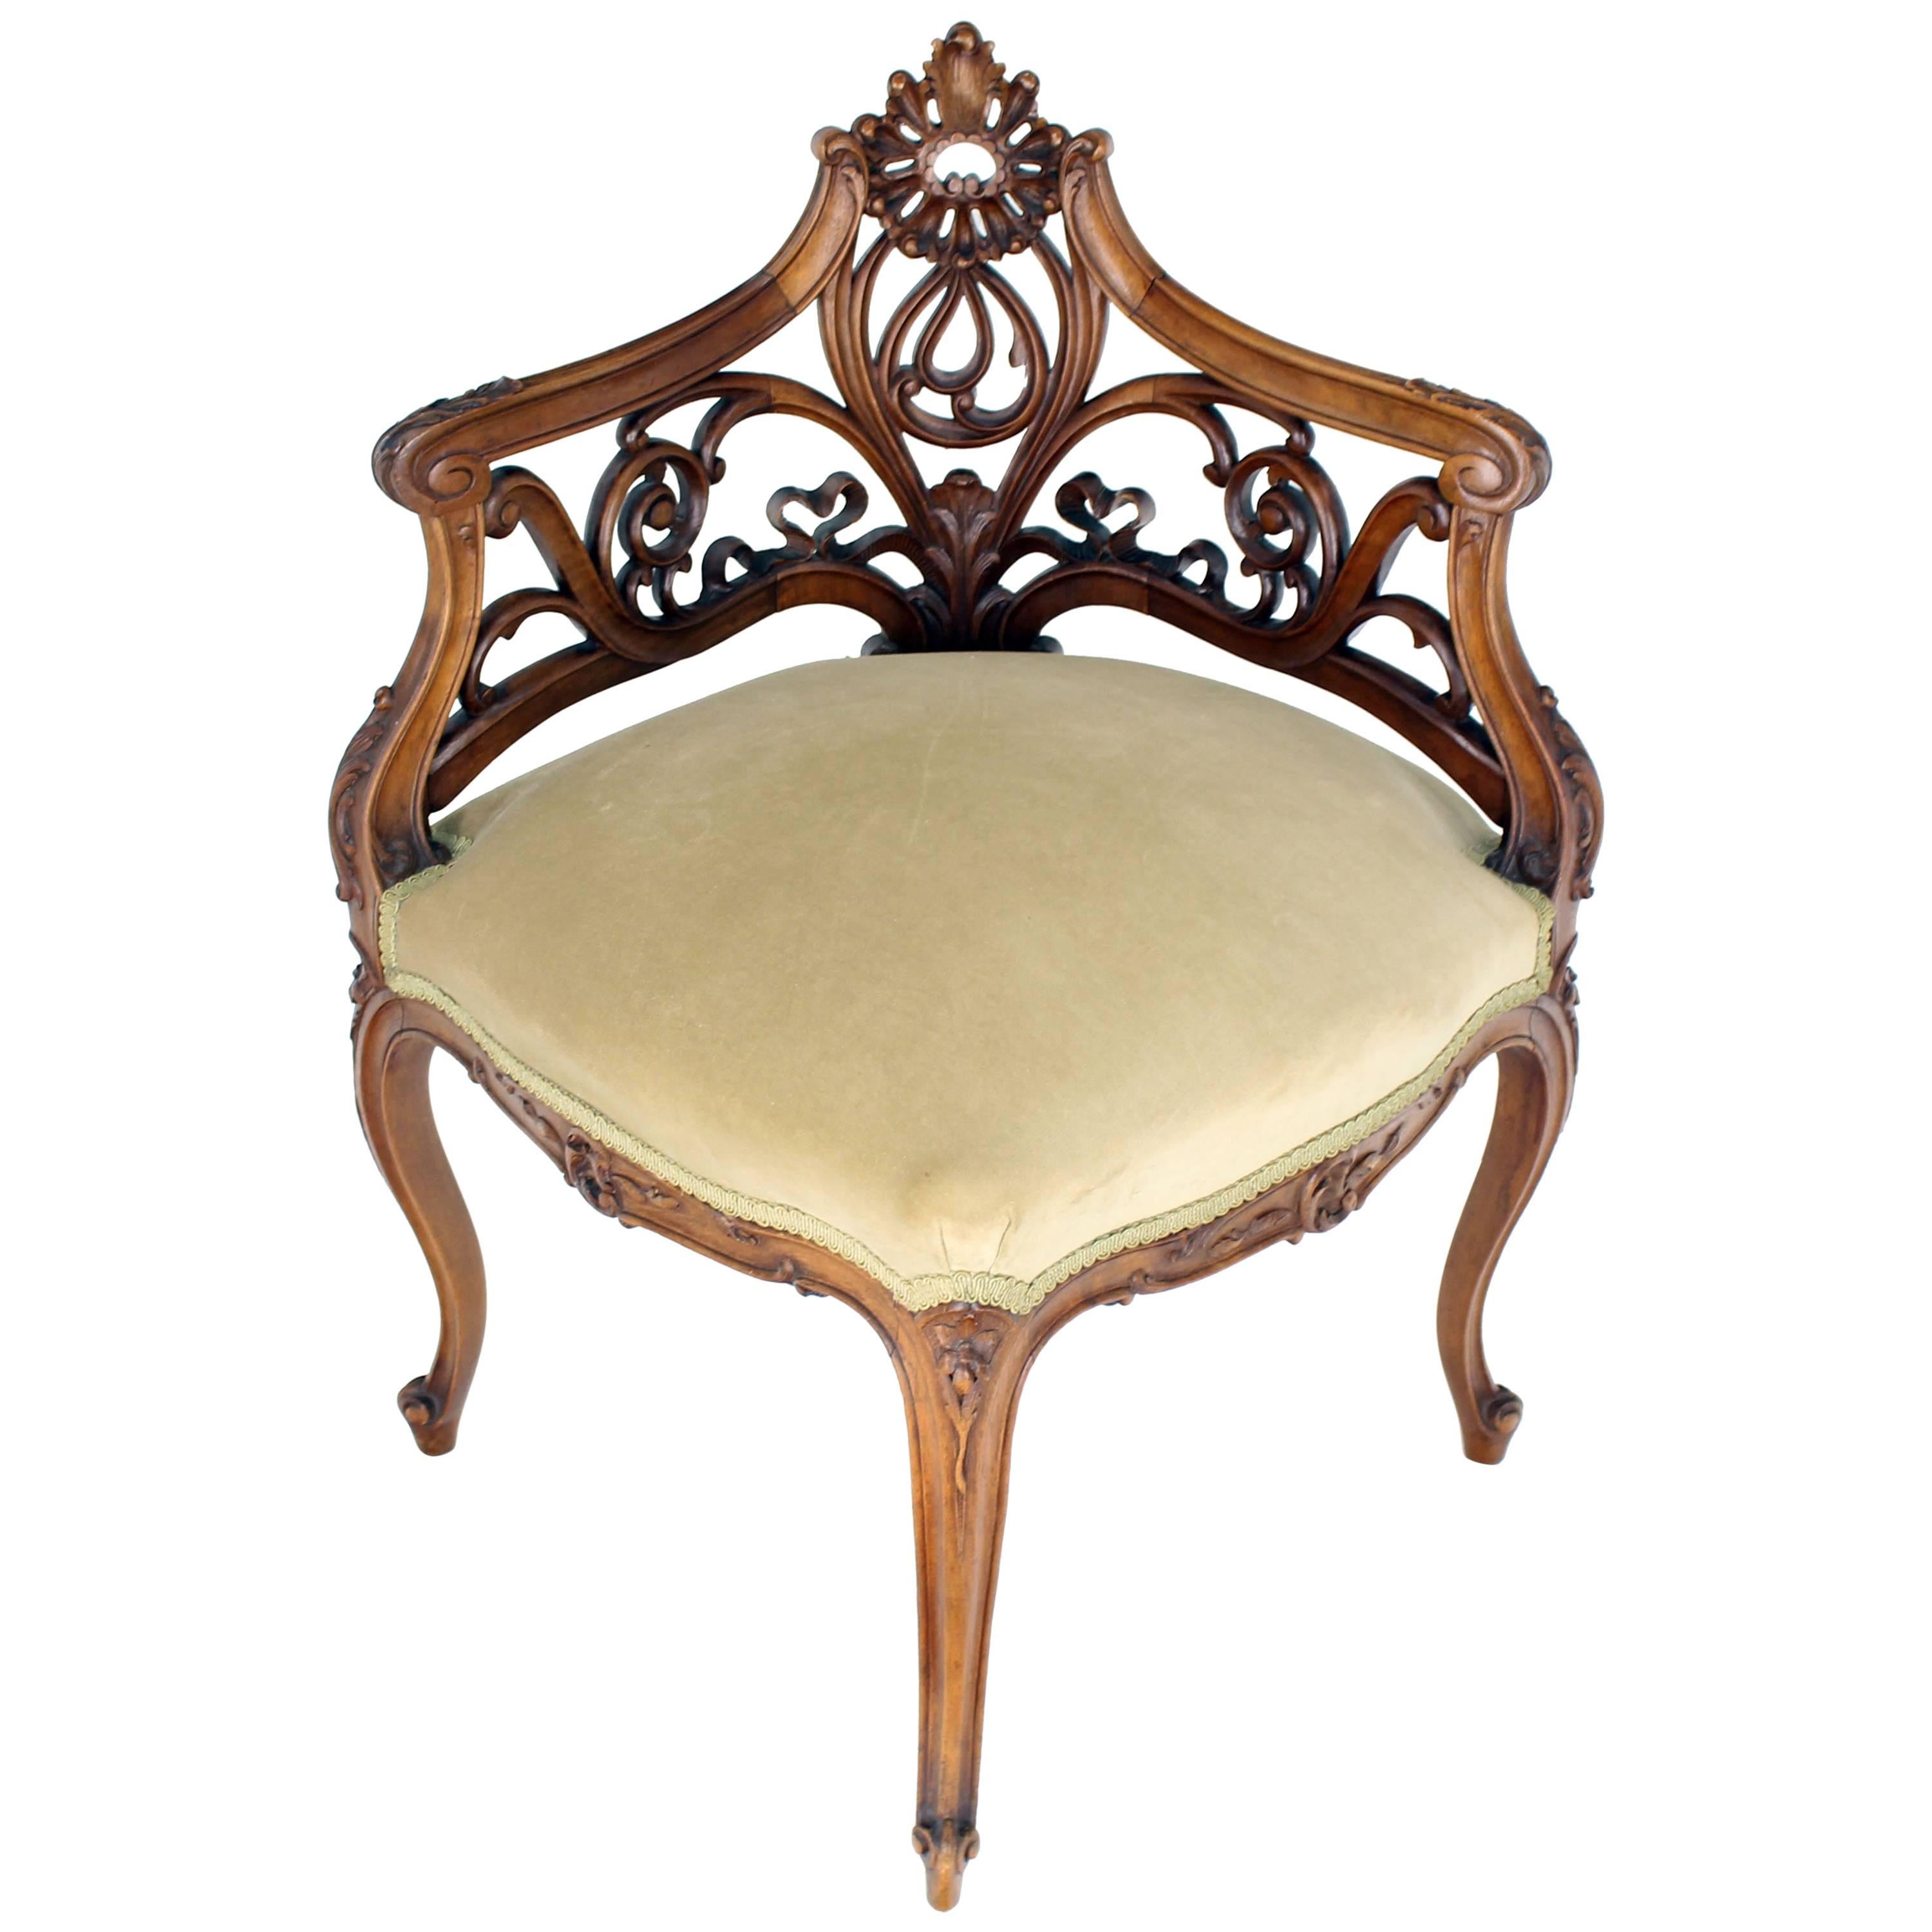 Carved Walnut Art Nouveau French Corner Chair